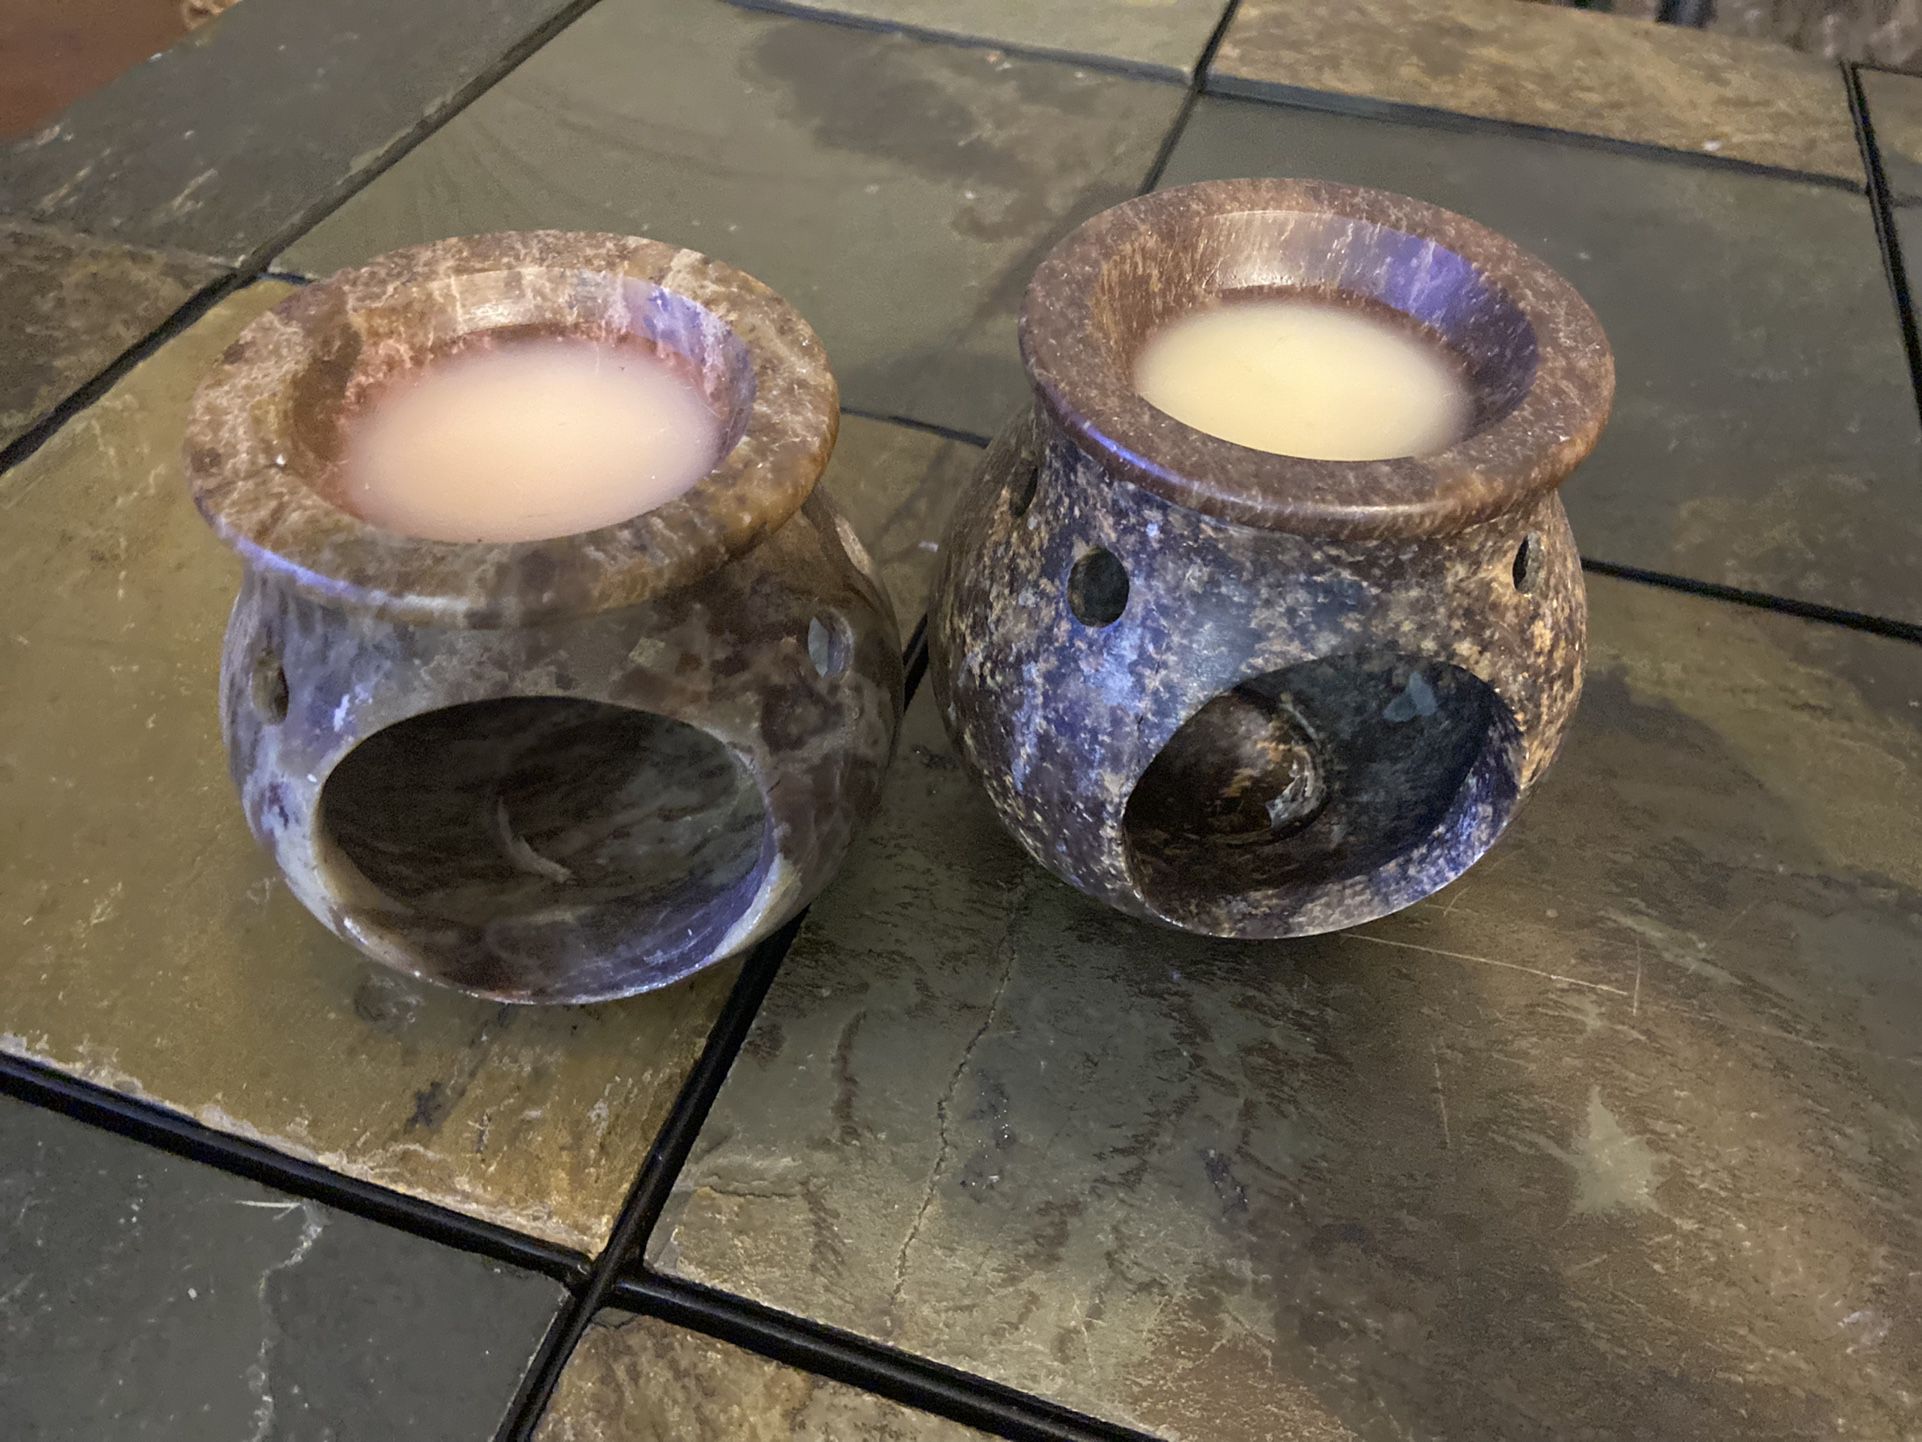 TWO YANKEE CANDLE / HOLDERS - VANILLA SCENT 